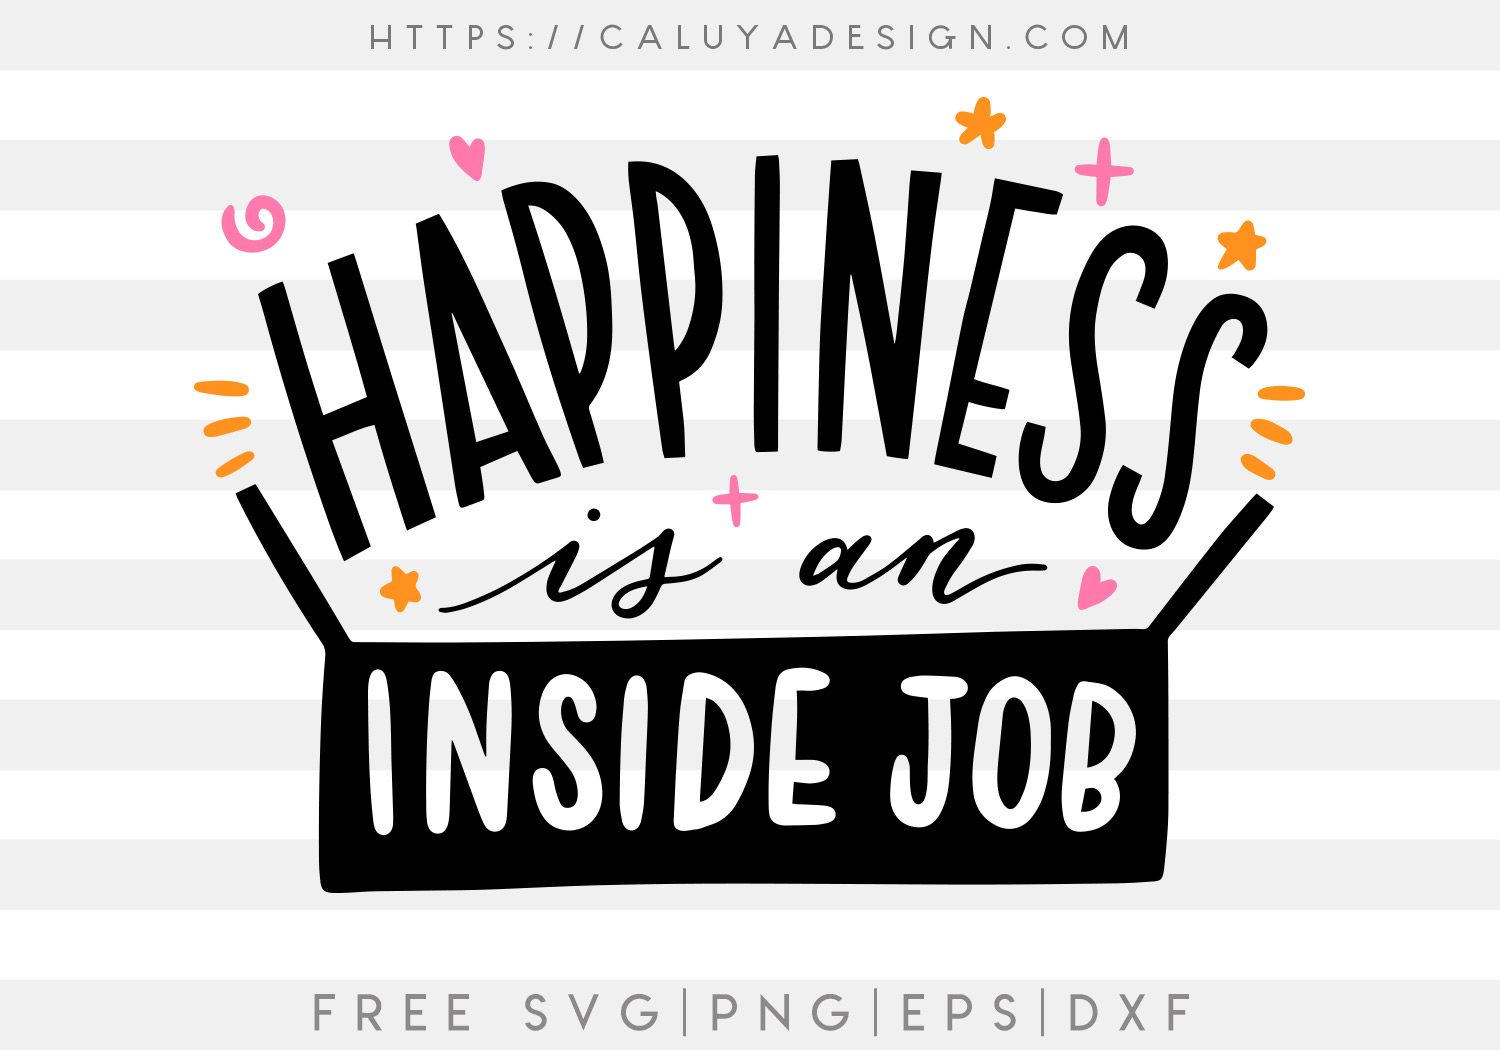 Happiness Is An Inside Job SVG, PNG, EPS & DXF